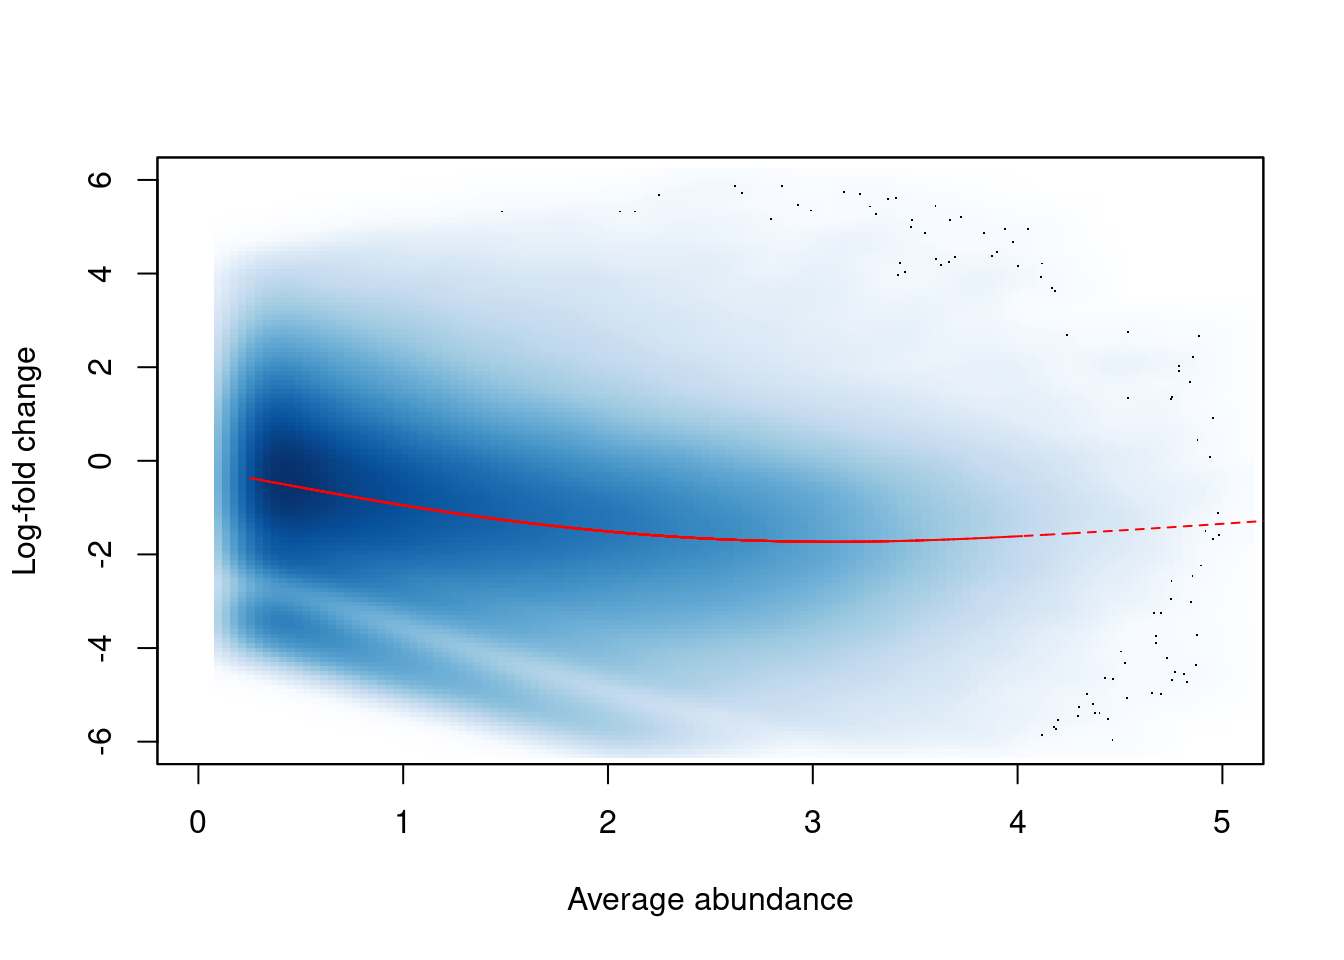 Abundance-dependent trend in the log-fold change between two H3K9ac samples (mature B over pro-B), across all windows retained after filtering. A smoothed spline fitted to the log-fold change against the average abundance is also shown in red.